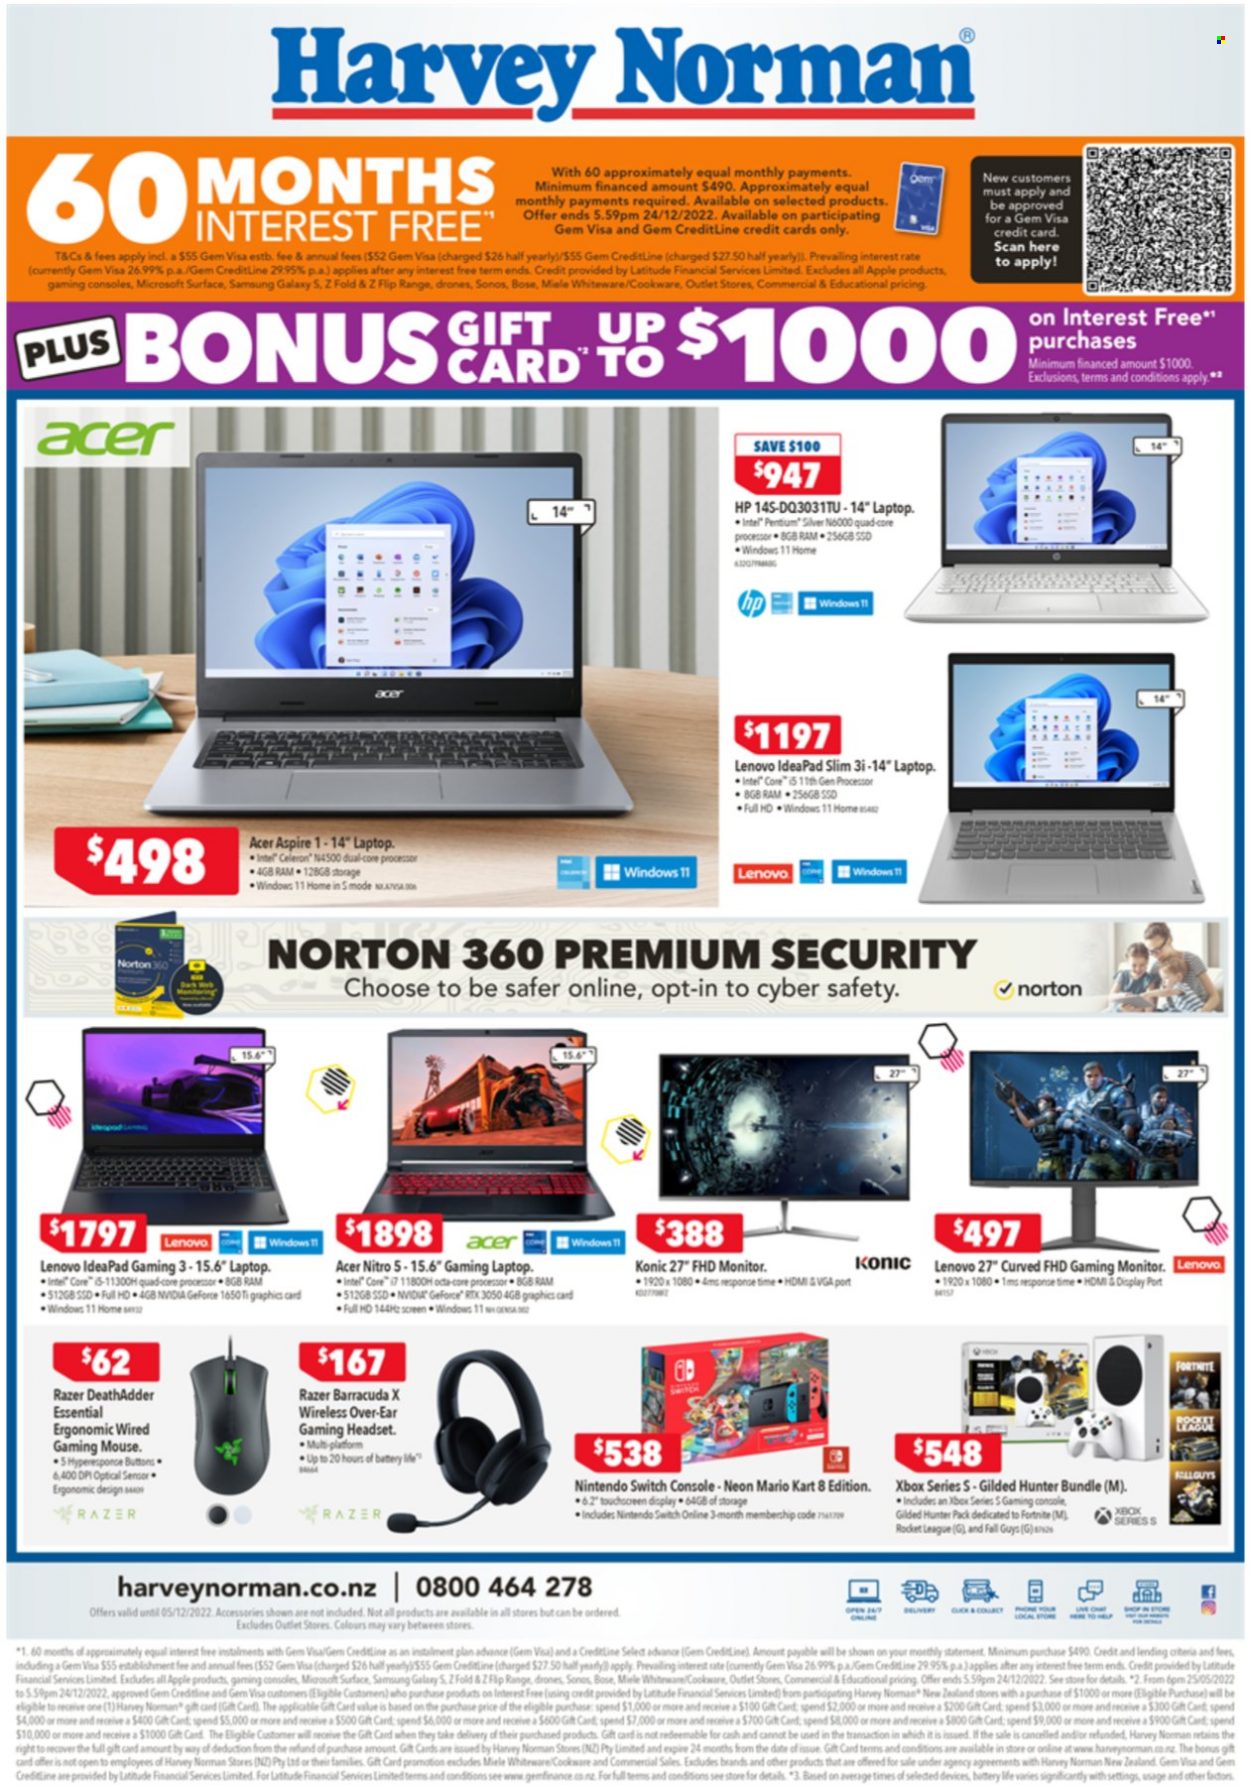 thumbnail - Harvey Norman mailer - 02.12.2022 - 04.12.2022 - Sales products - gaming mouse, Razer, gaming headset, Nintendo Switch, Apple, Intel, Norton, Acer, Lenovo, Hewlett Packard, Samsung Galaxy, drone, Samsung, Samsung Galaxy S, laptop, gaming laptop, GeForce, mouse, monitor, Xbox, Sonos, BOSE, headset, Miele. Page 4.